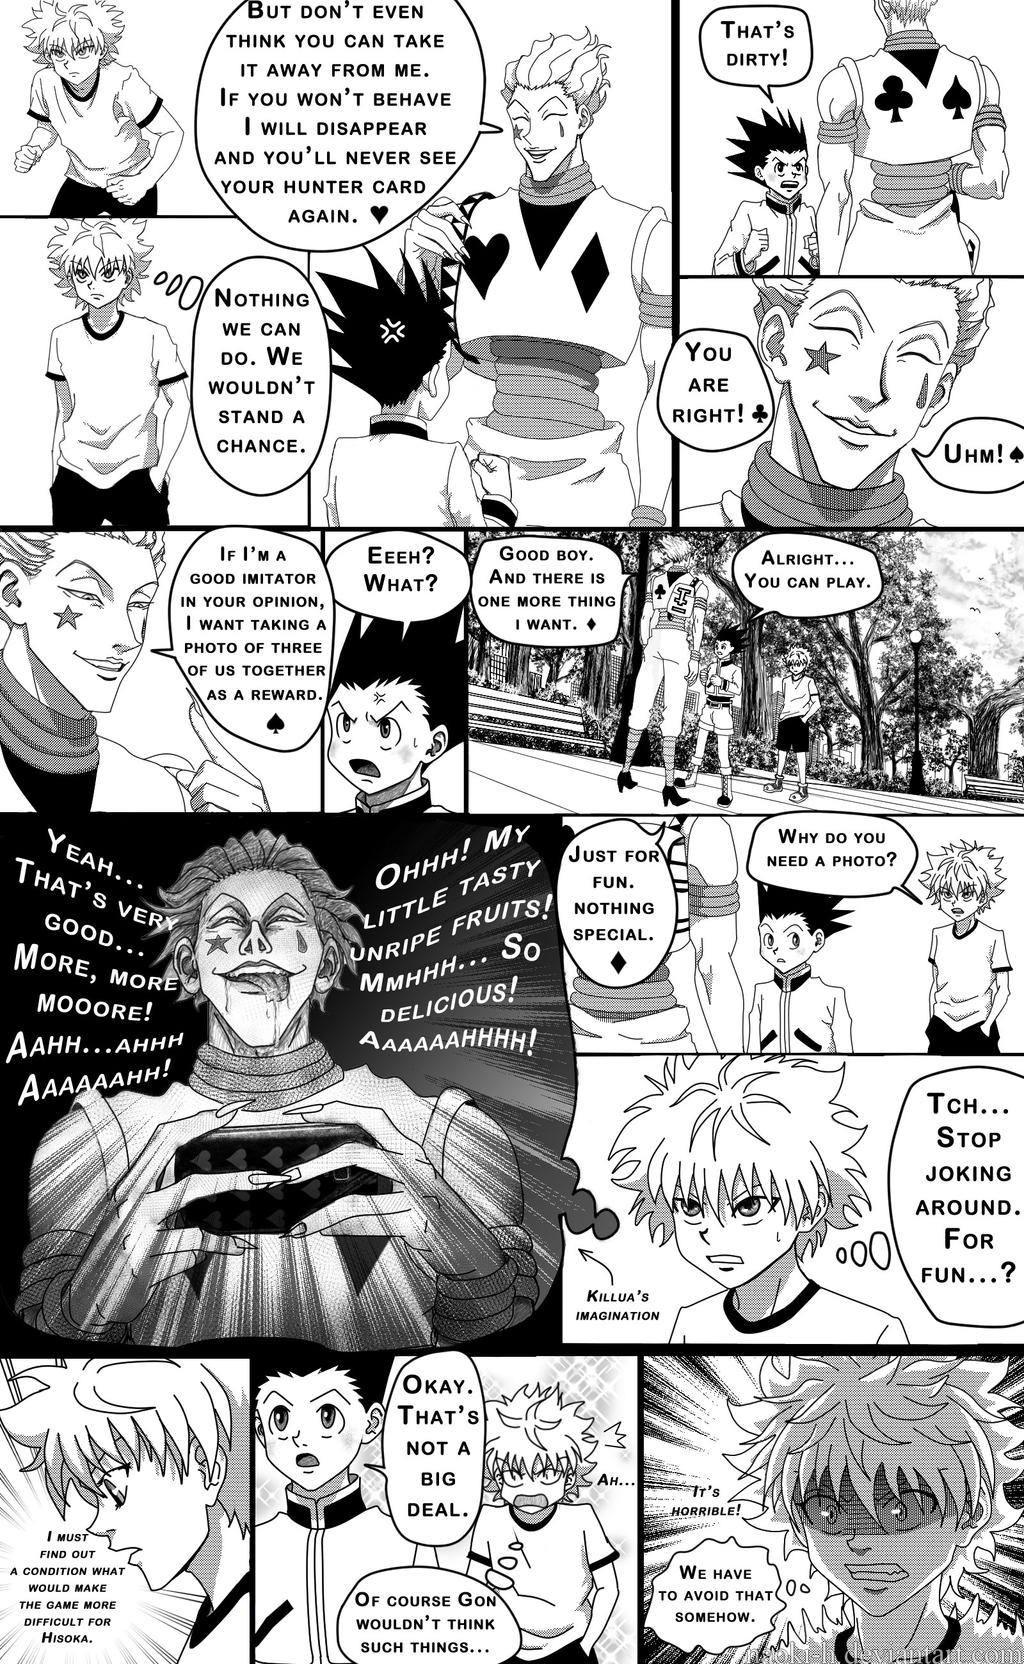 For people who avoids reading hxh manga because Togashi's art is